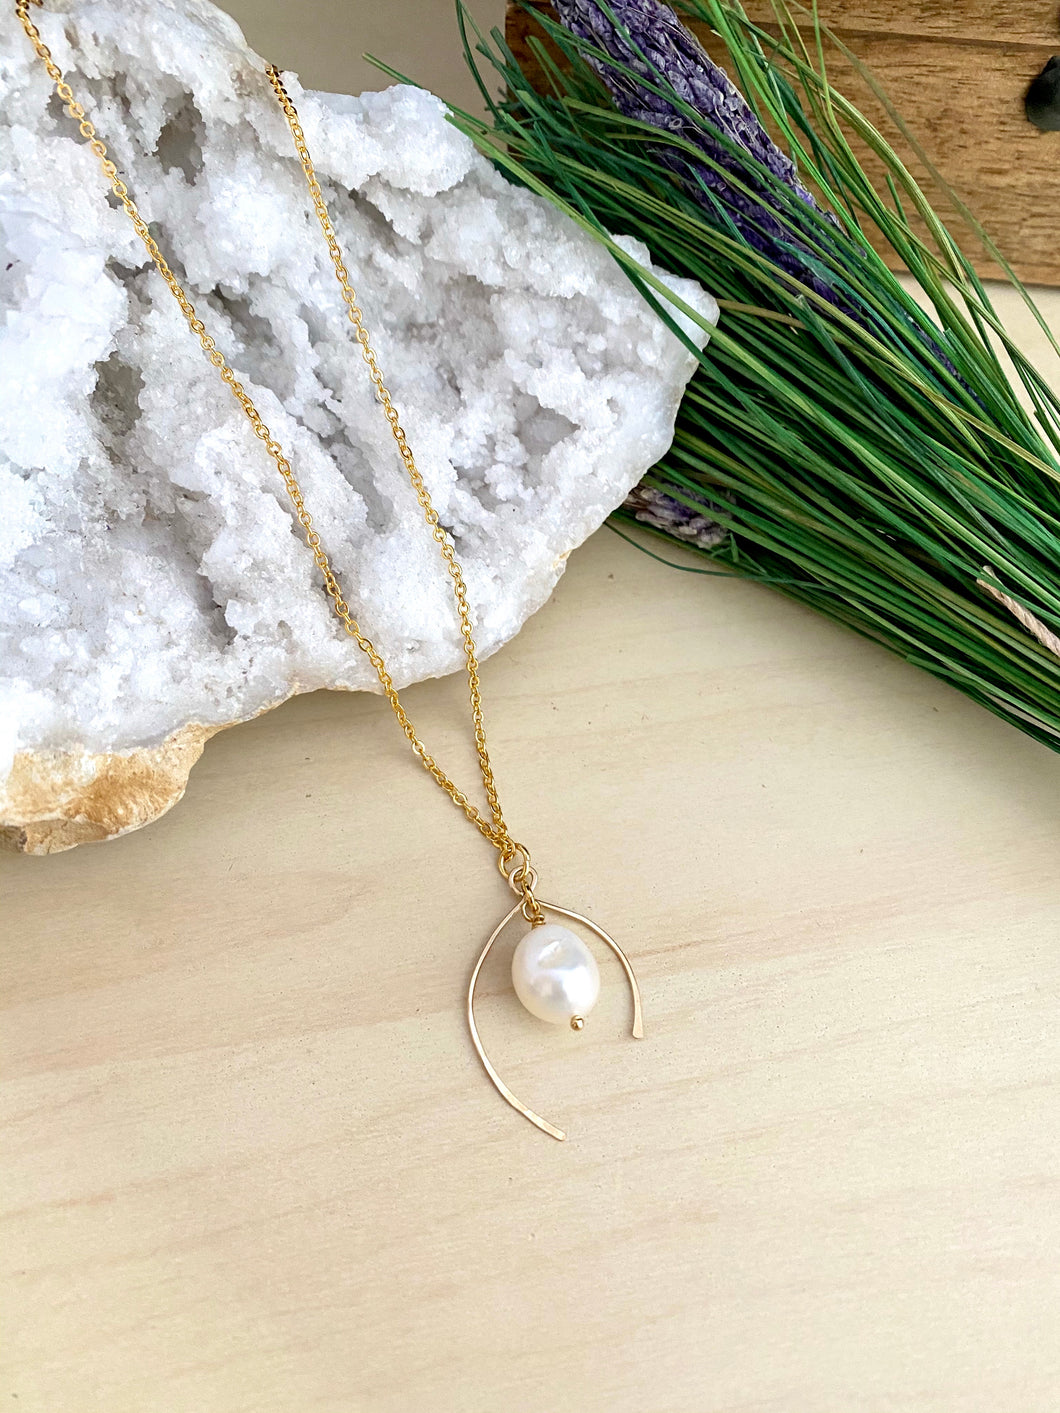 Wish bone shaped pendant necklace made from 14k gold fill wire and accompanied by a white freshwater pearl drop 